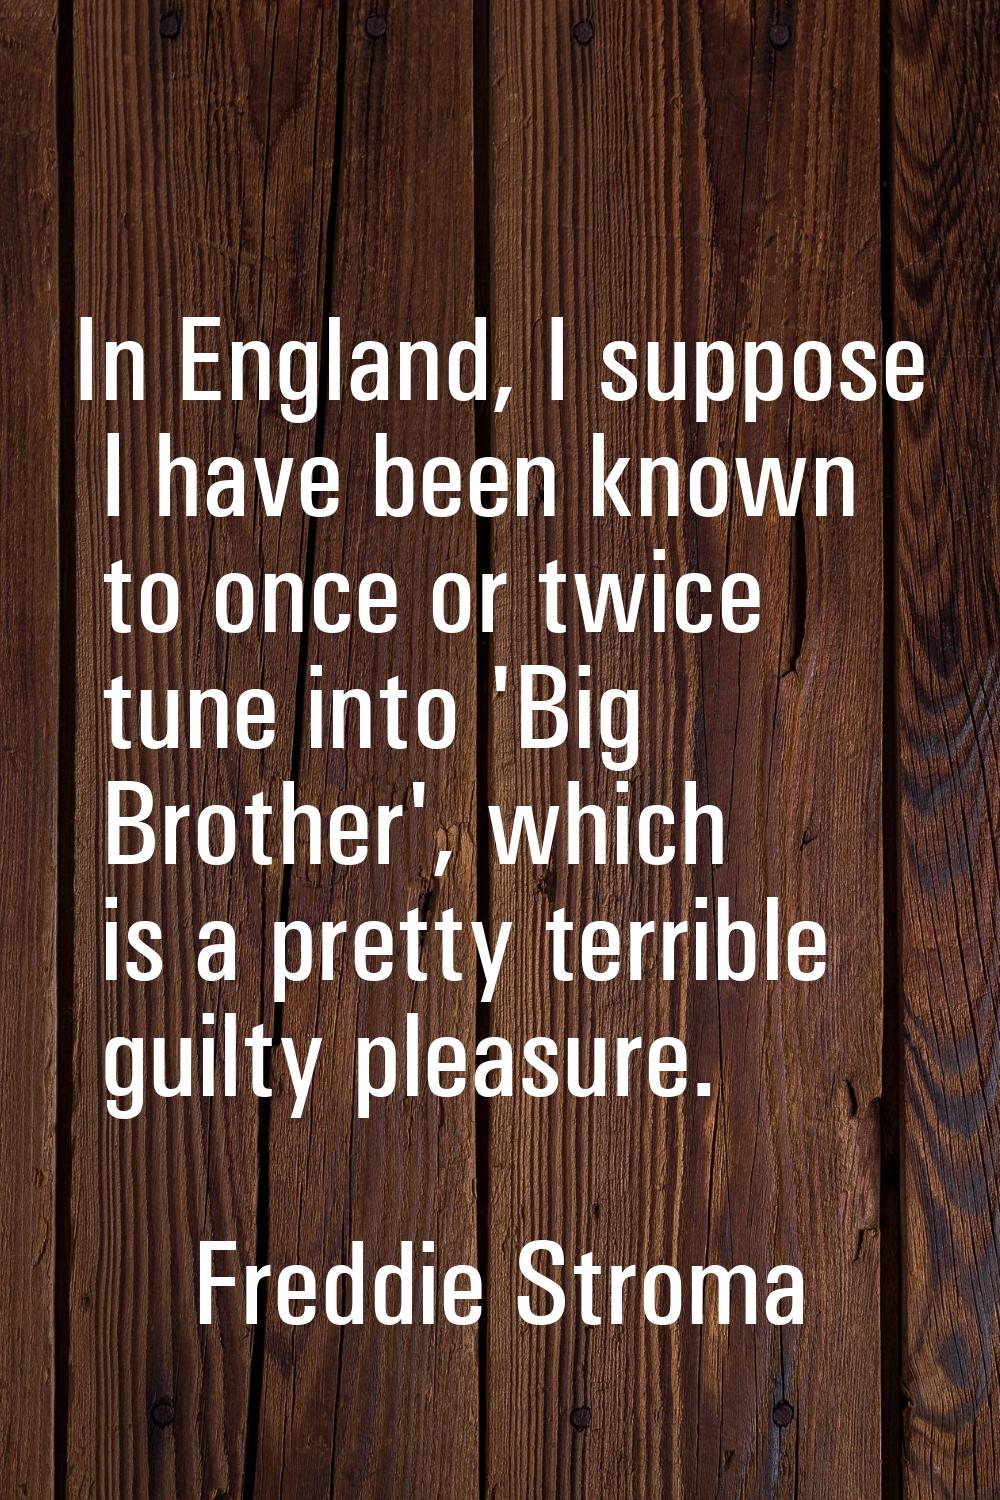 In England, I suppose I have been known to once or twice tune into 'Big Brother', which is a pretty